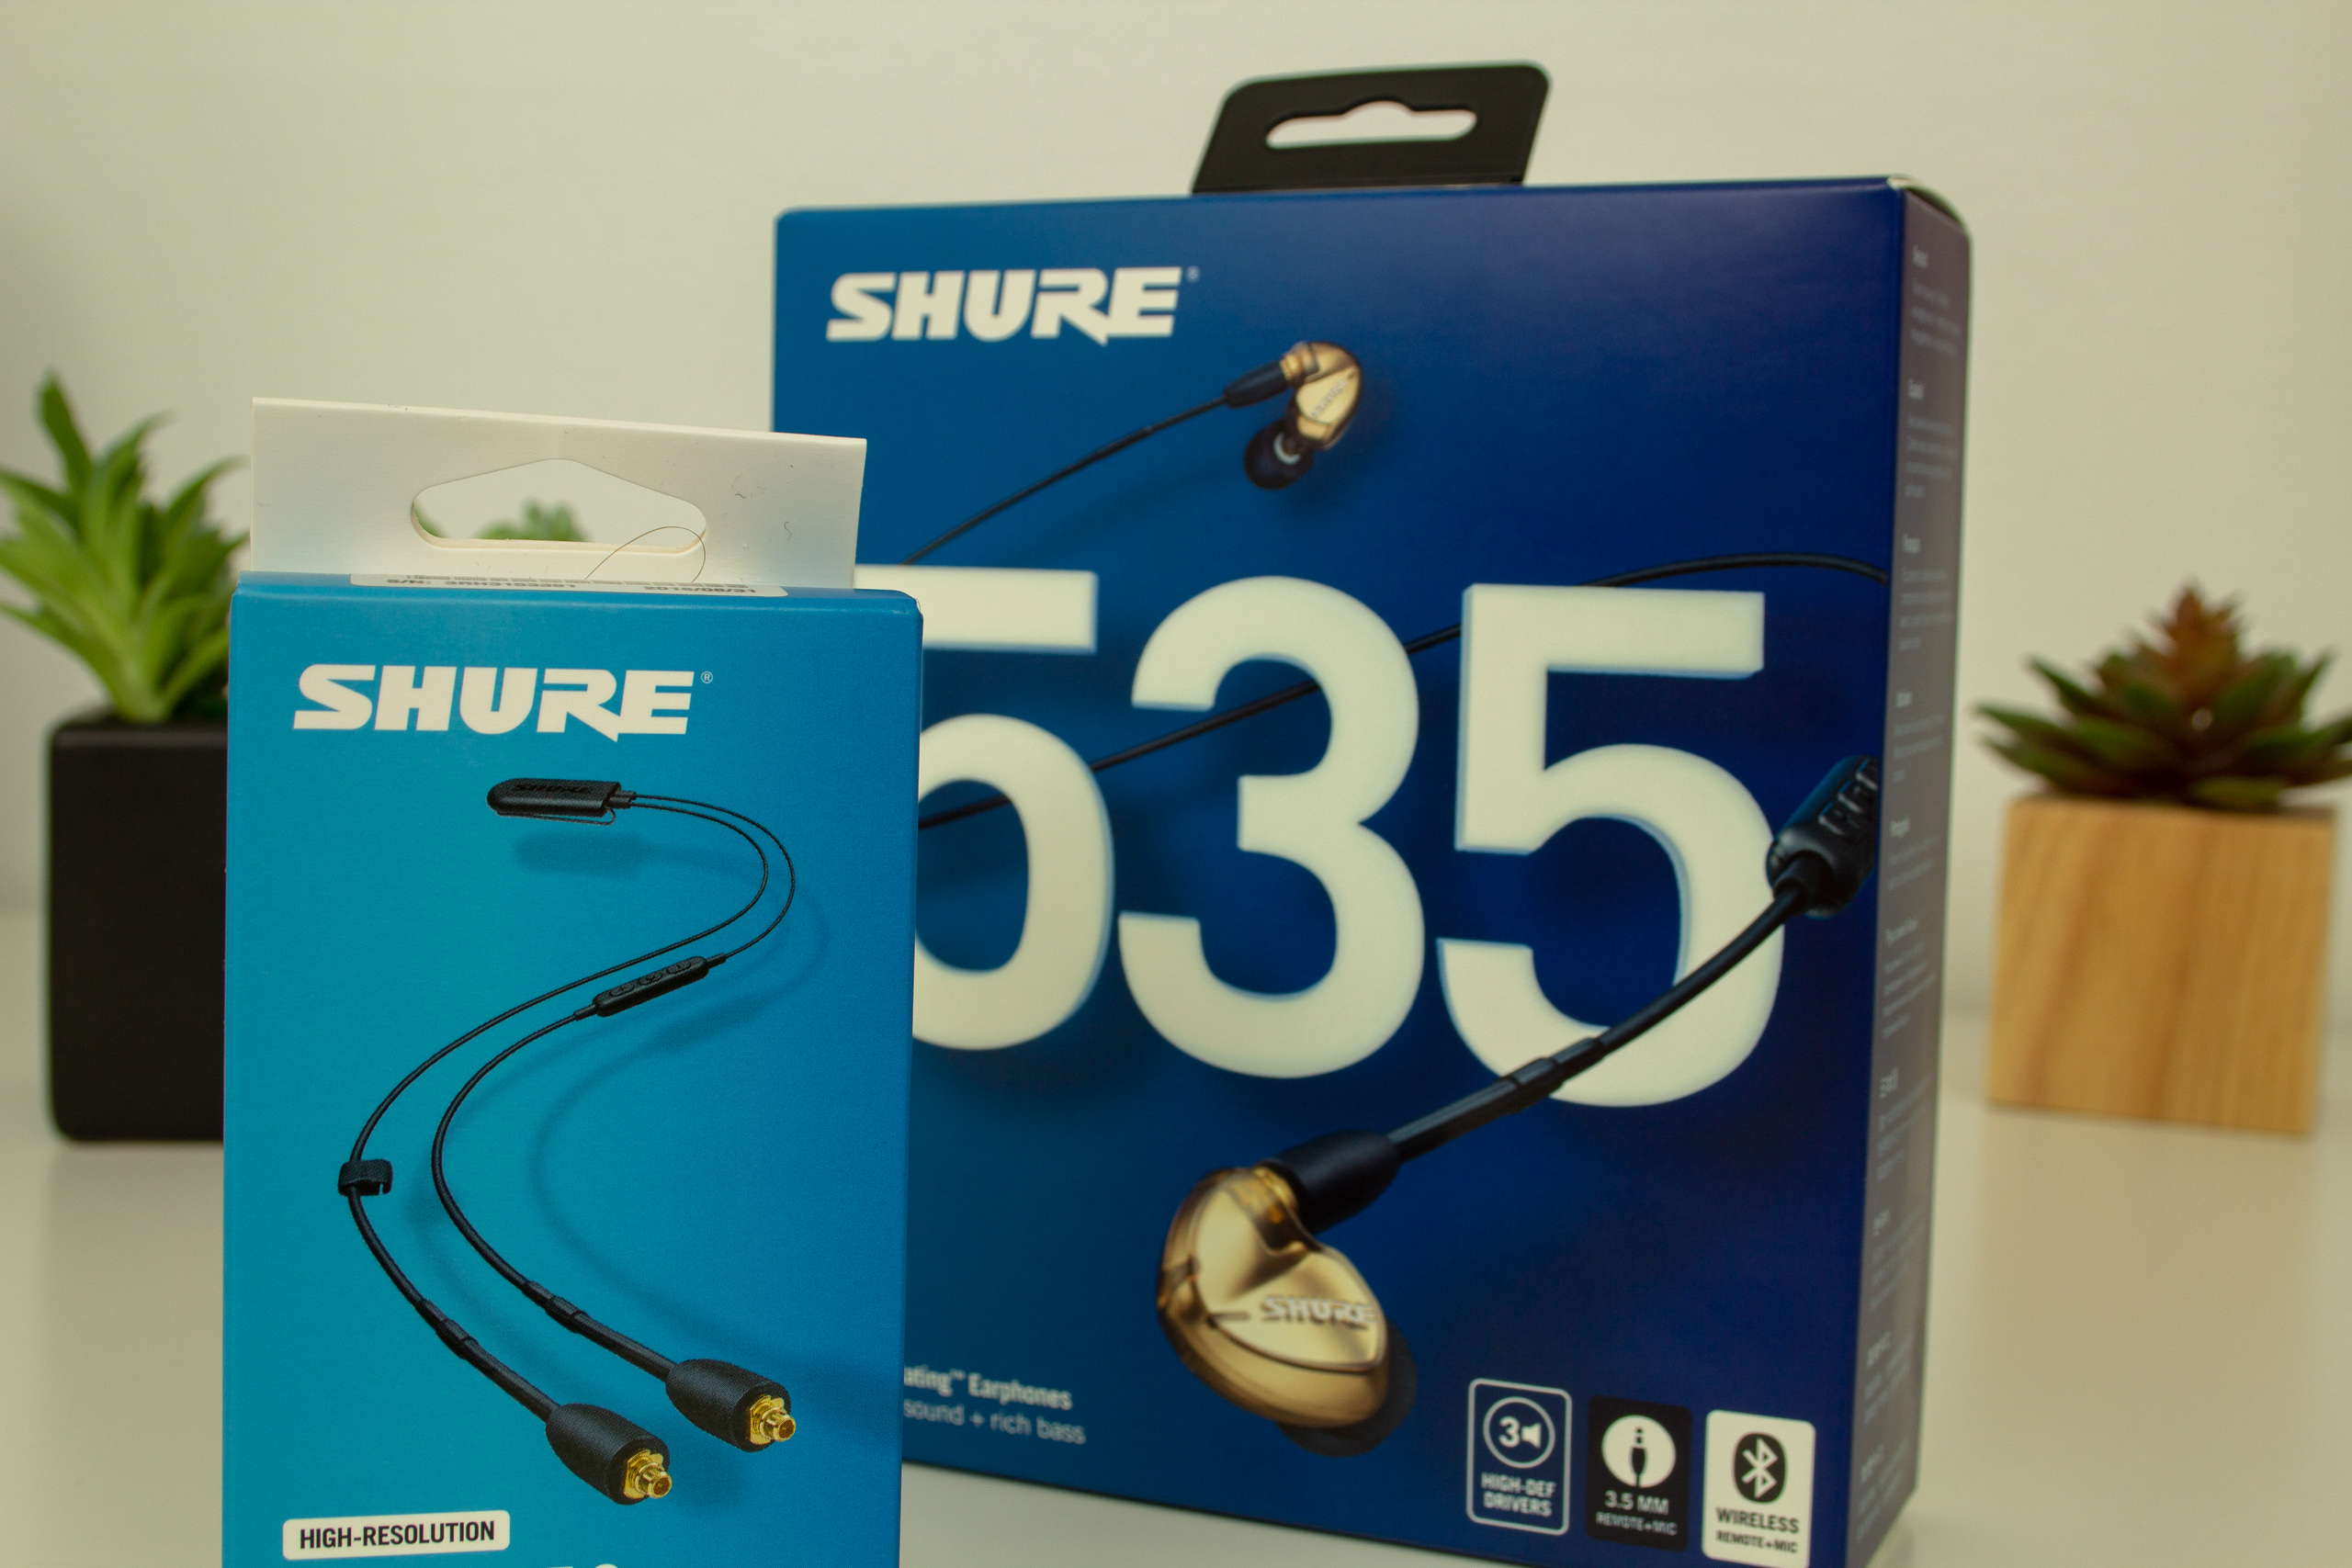 Shure SE535 Earbud Review - Worth every cent | The Nerdy